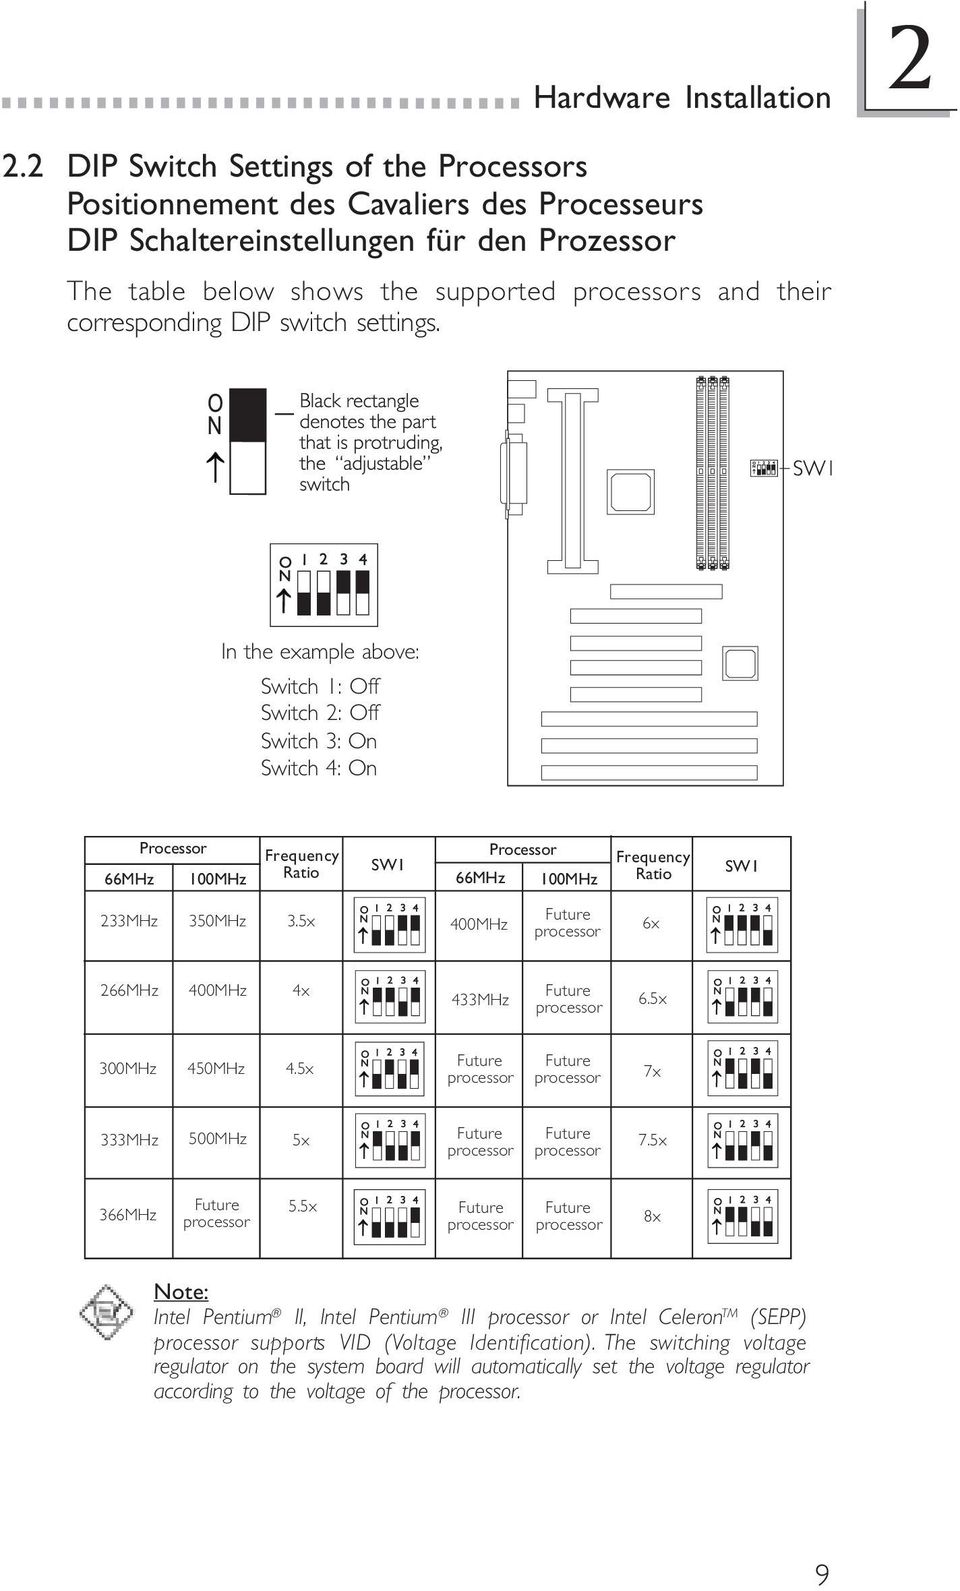 DIP switch settings. In the example above: Switch 1: Off Switch 2: Off Switch 3: On Switch 4: On 66MHz Processor 1MHz Frequency Ratio SW1 66MHz Processor 1MHz Frequency Ratio SW1 233MHz 35MHz 3.